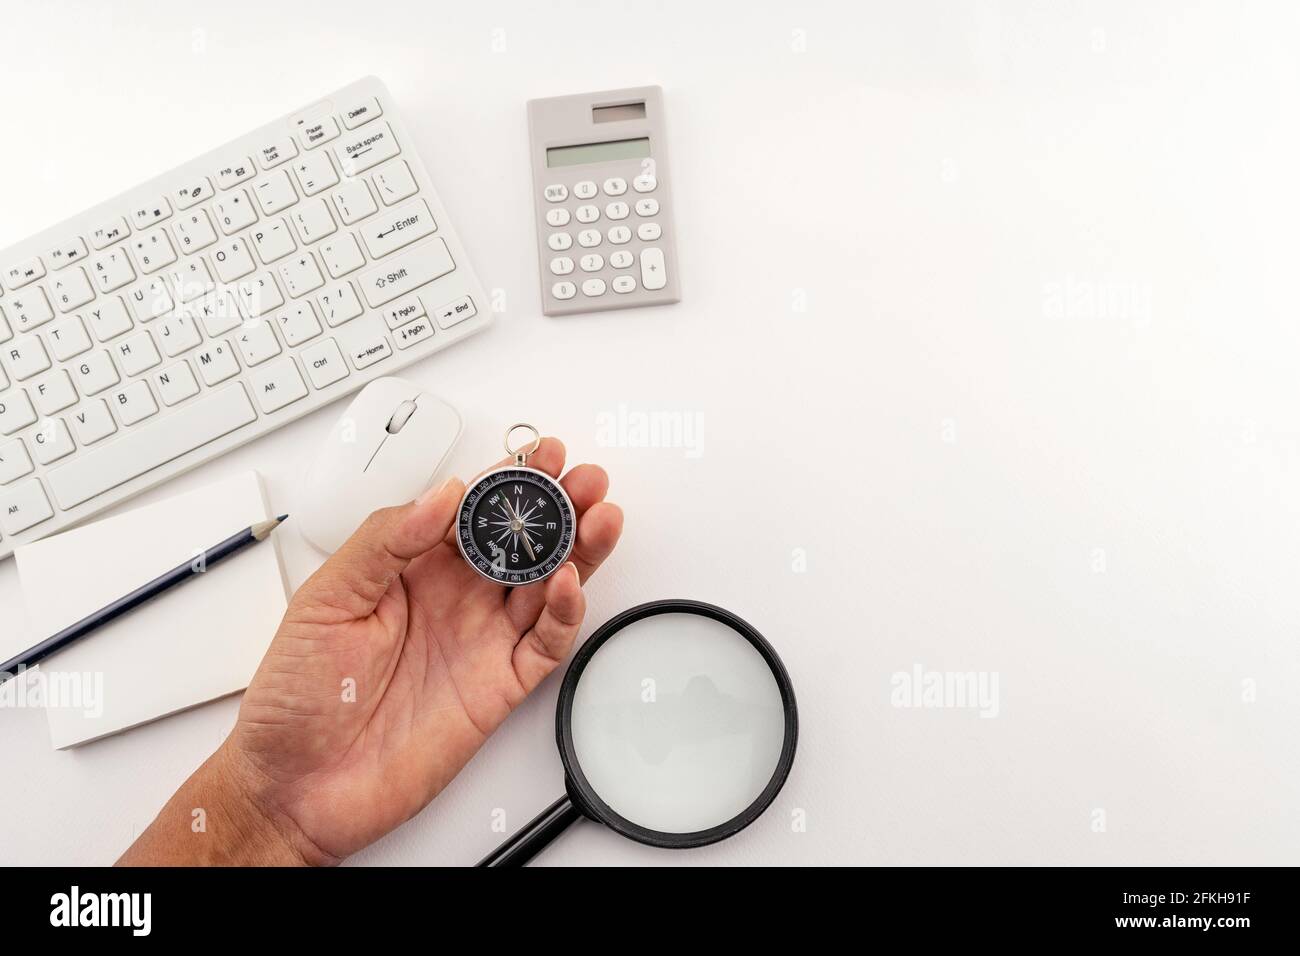 Businessman looking at a compass which he is holding in his hand, Businessman with a compass holding in hand on Business objects White table backgroun Stock Photo